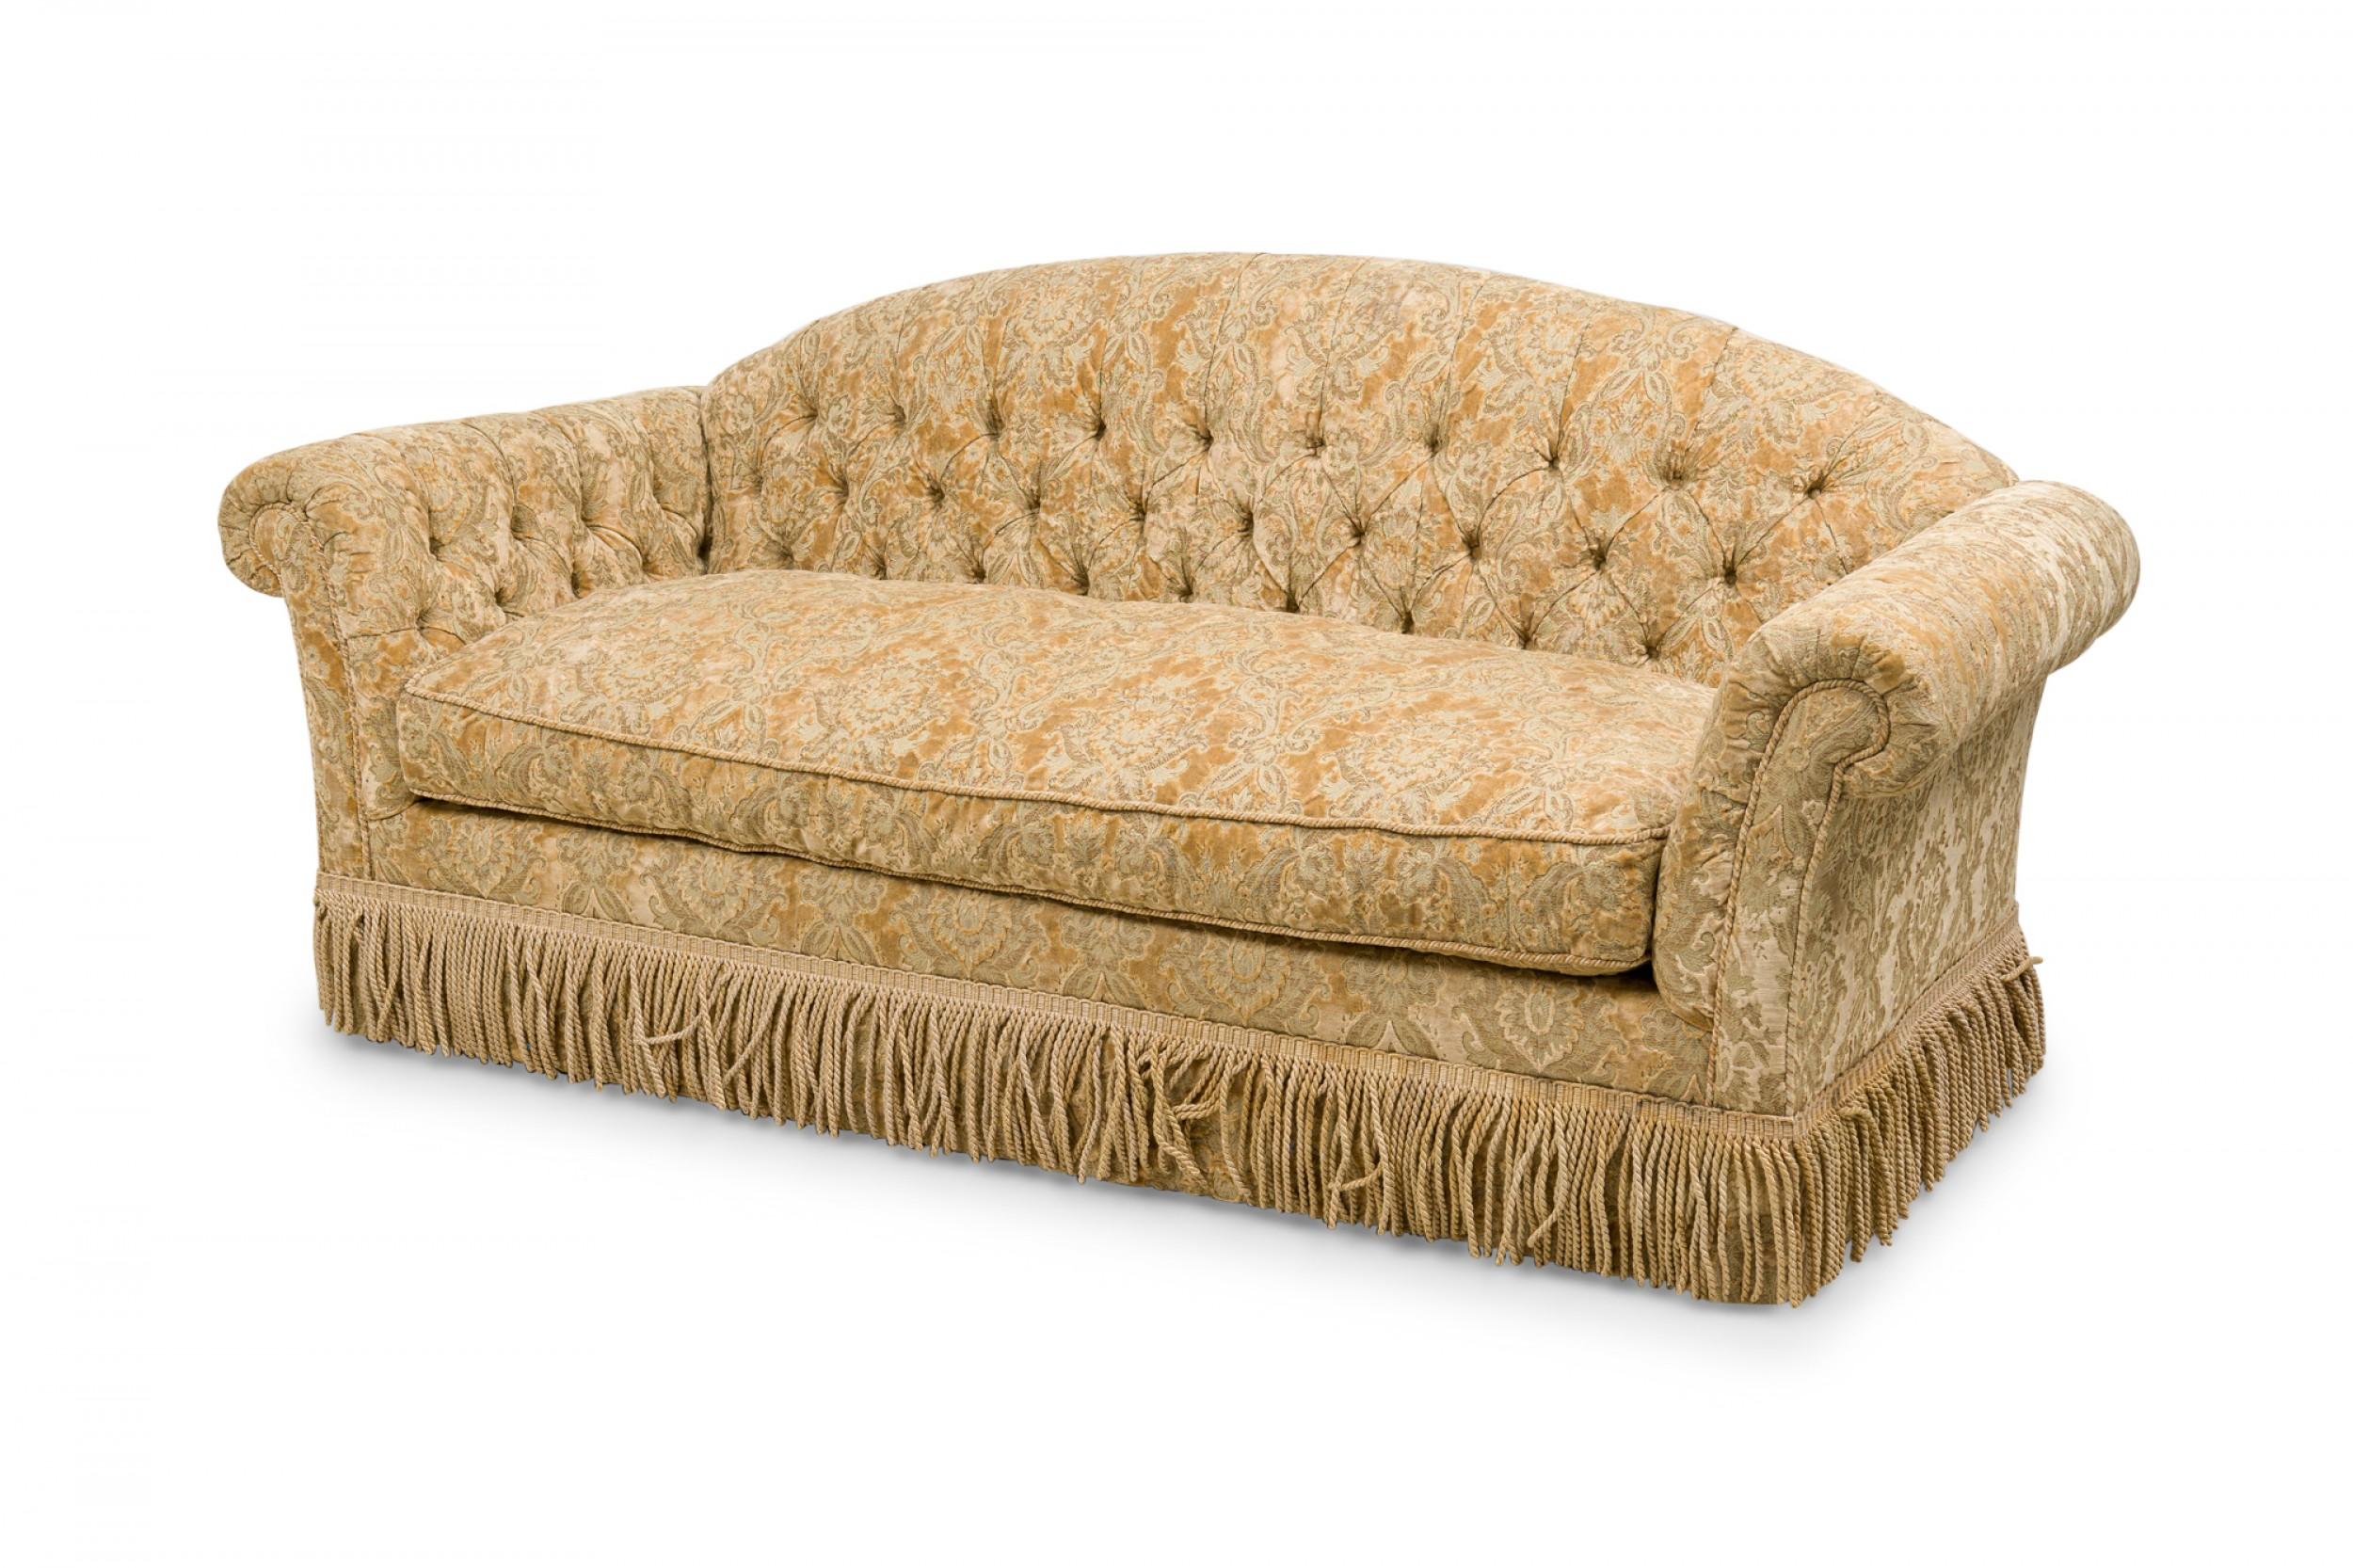 English Victorian-style sofa with a rounded button tufted back and scrolled arms, upholstered in a gold velvet damask with a matching rope fringe skirt.